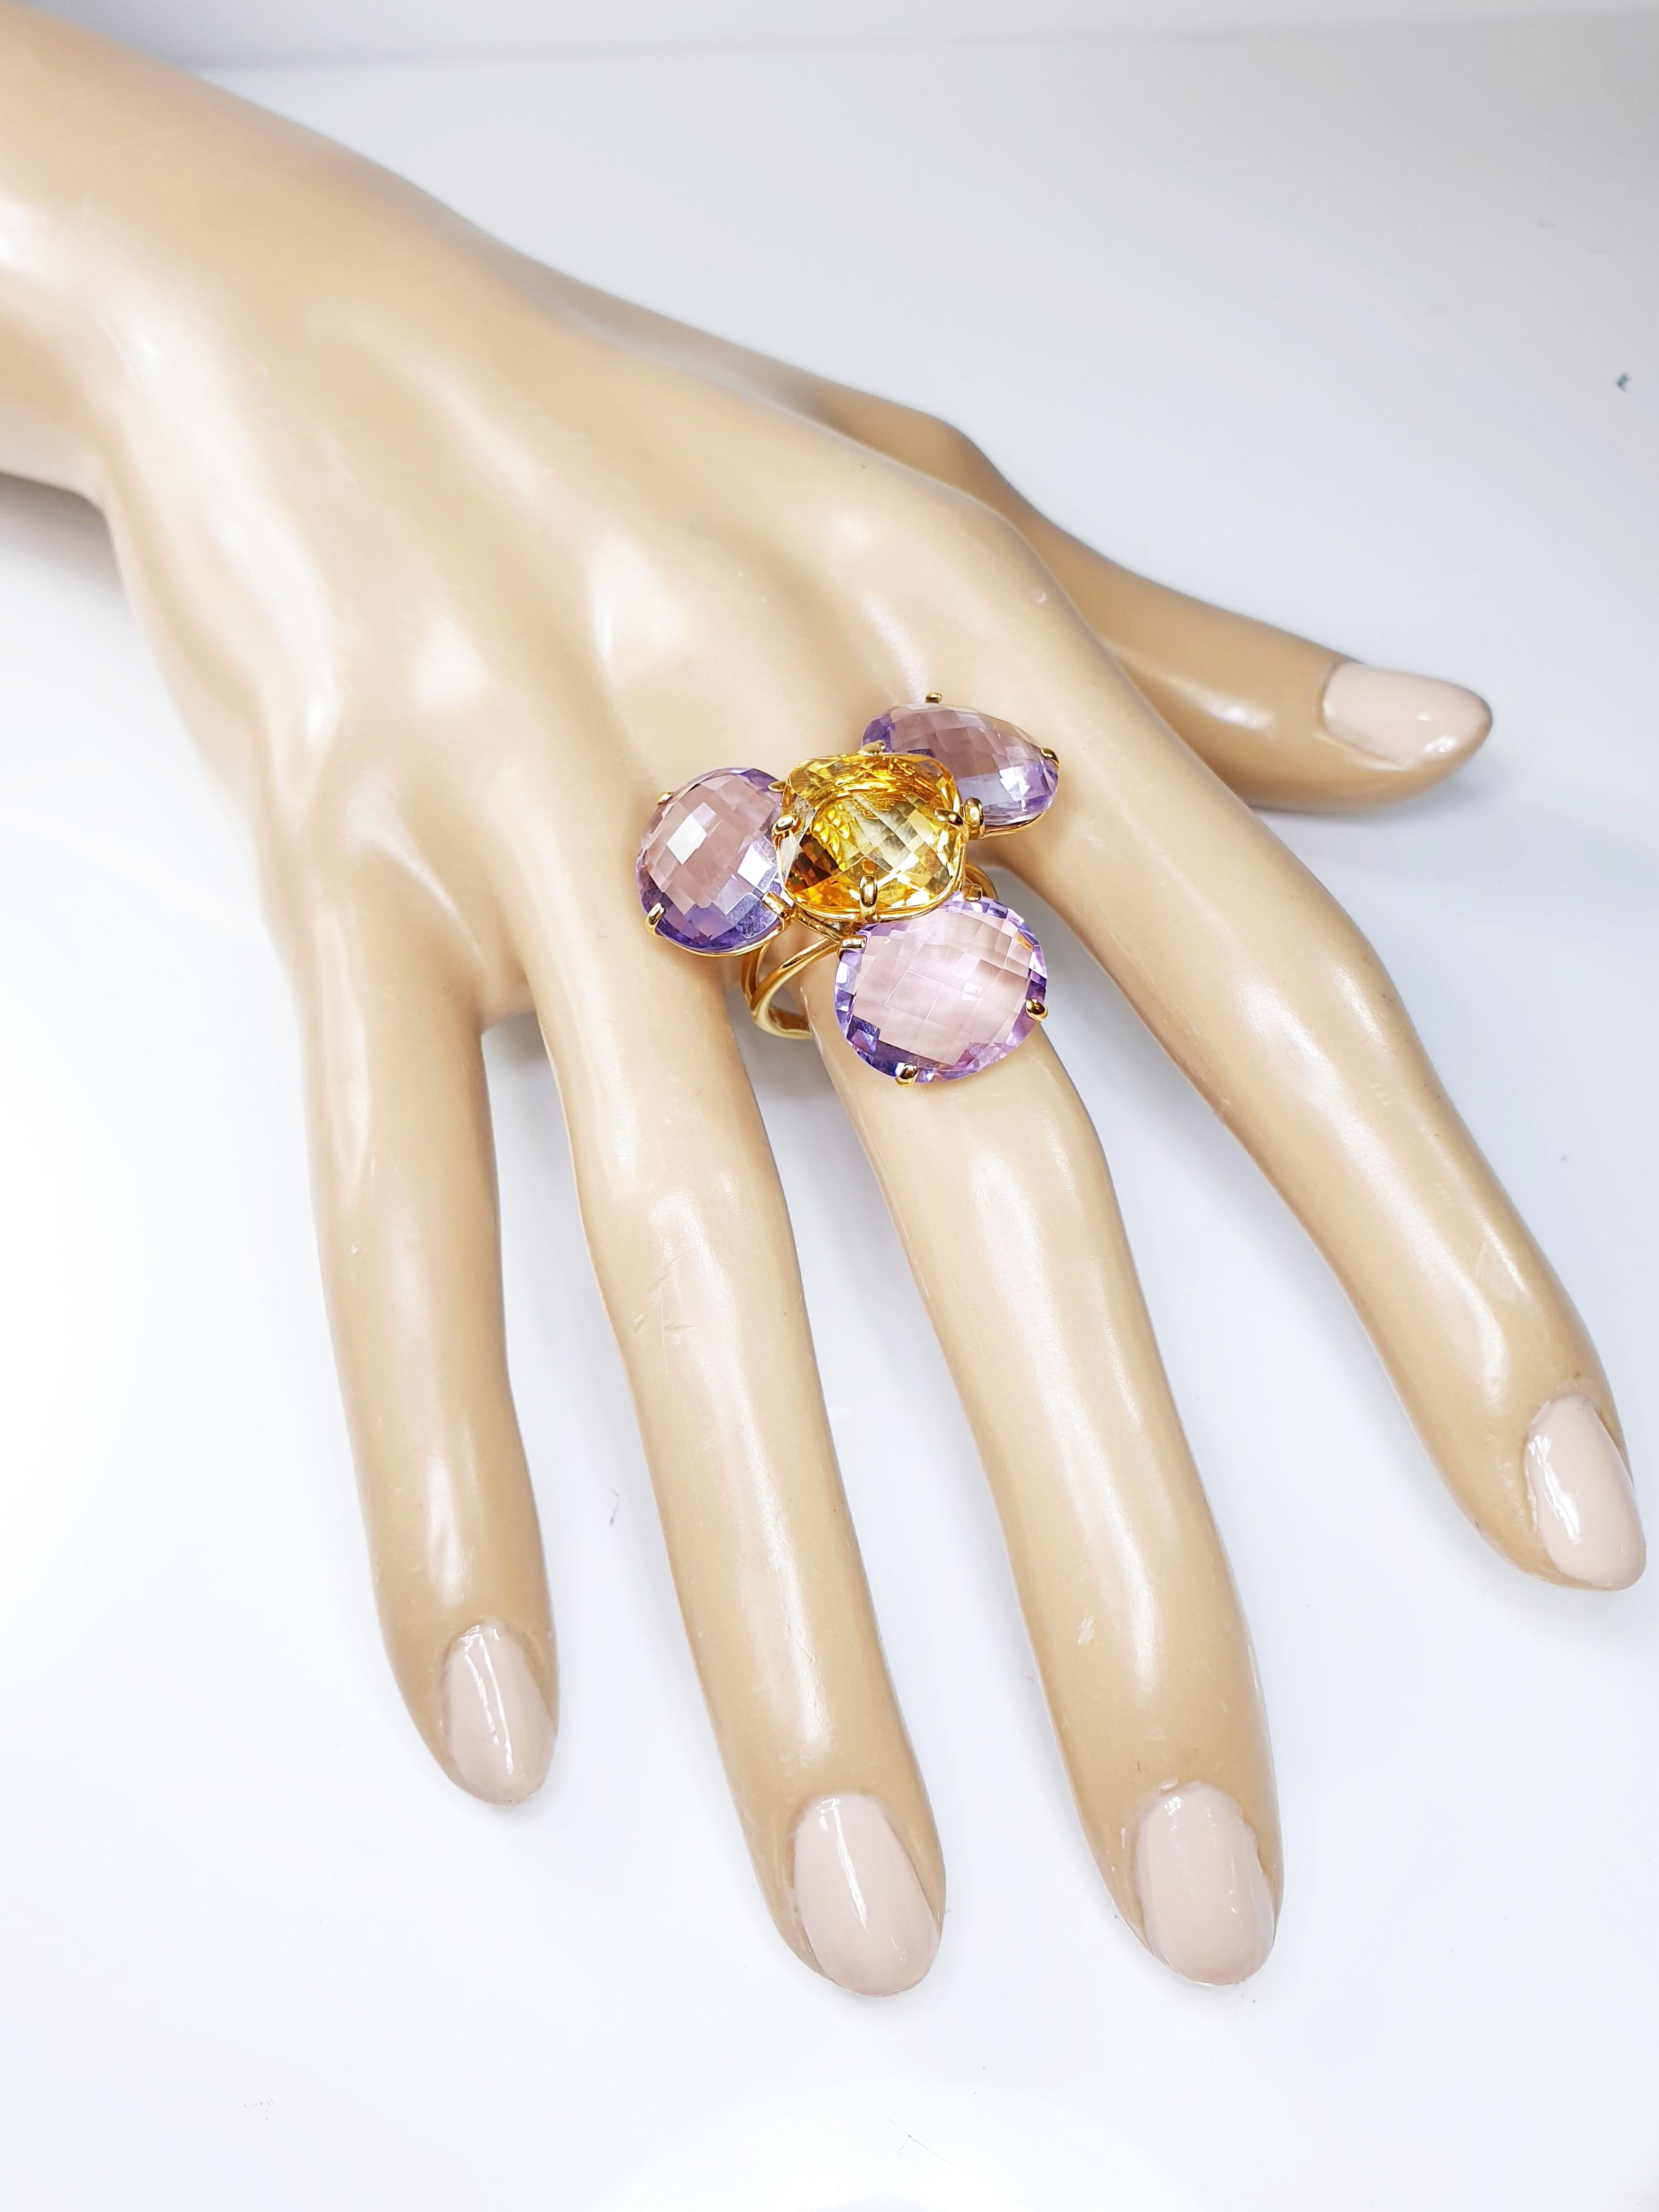 Multiphaceted Flower Ring with Central Citrine and Three Amethysts For Sale 2